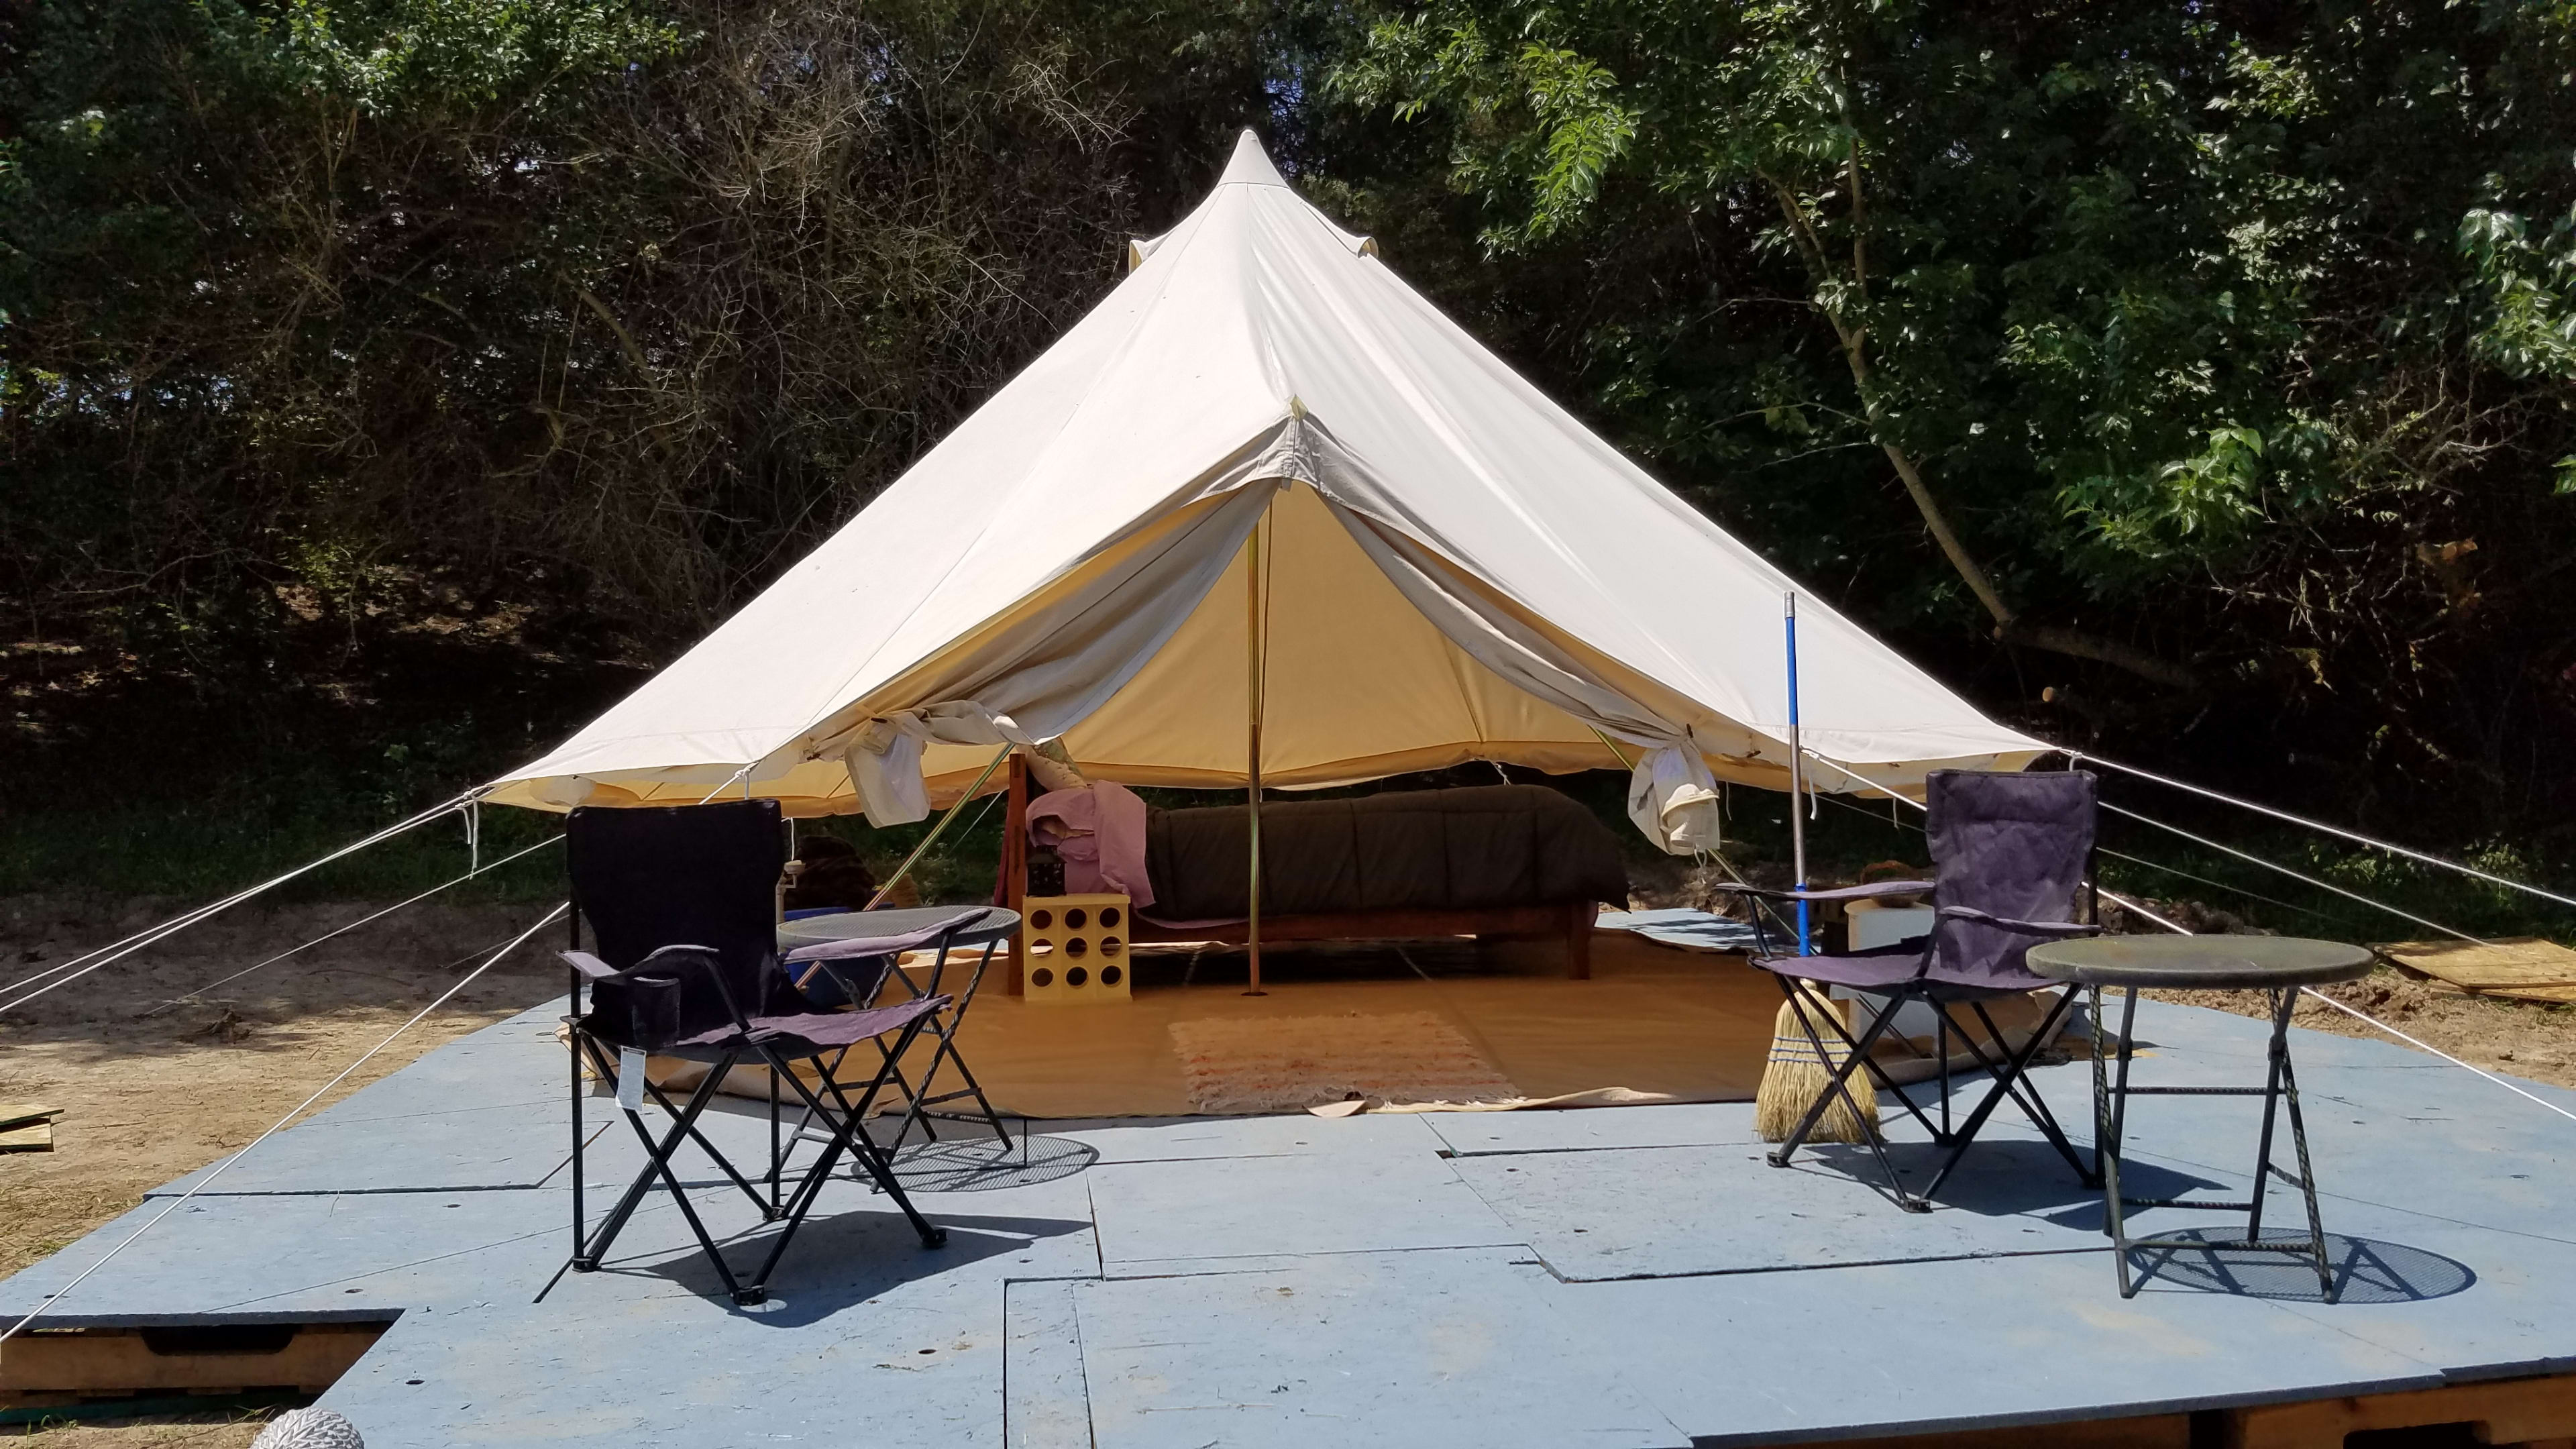 16 Foot bell tent with a queen size blow up mattress on a bed frame with complete linens available for your use or set up your own tent. 